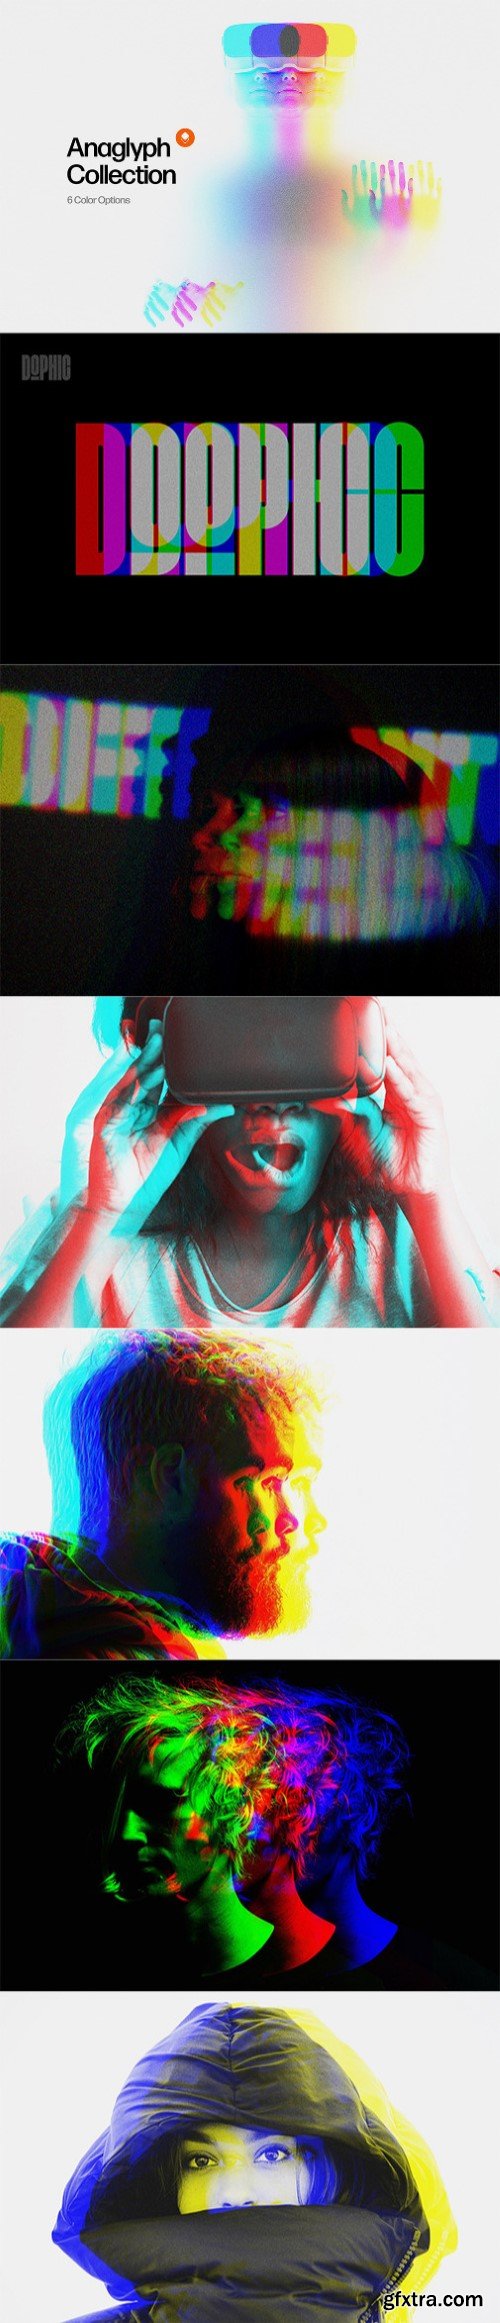 Anaglyph photo effect